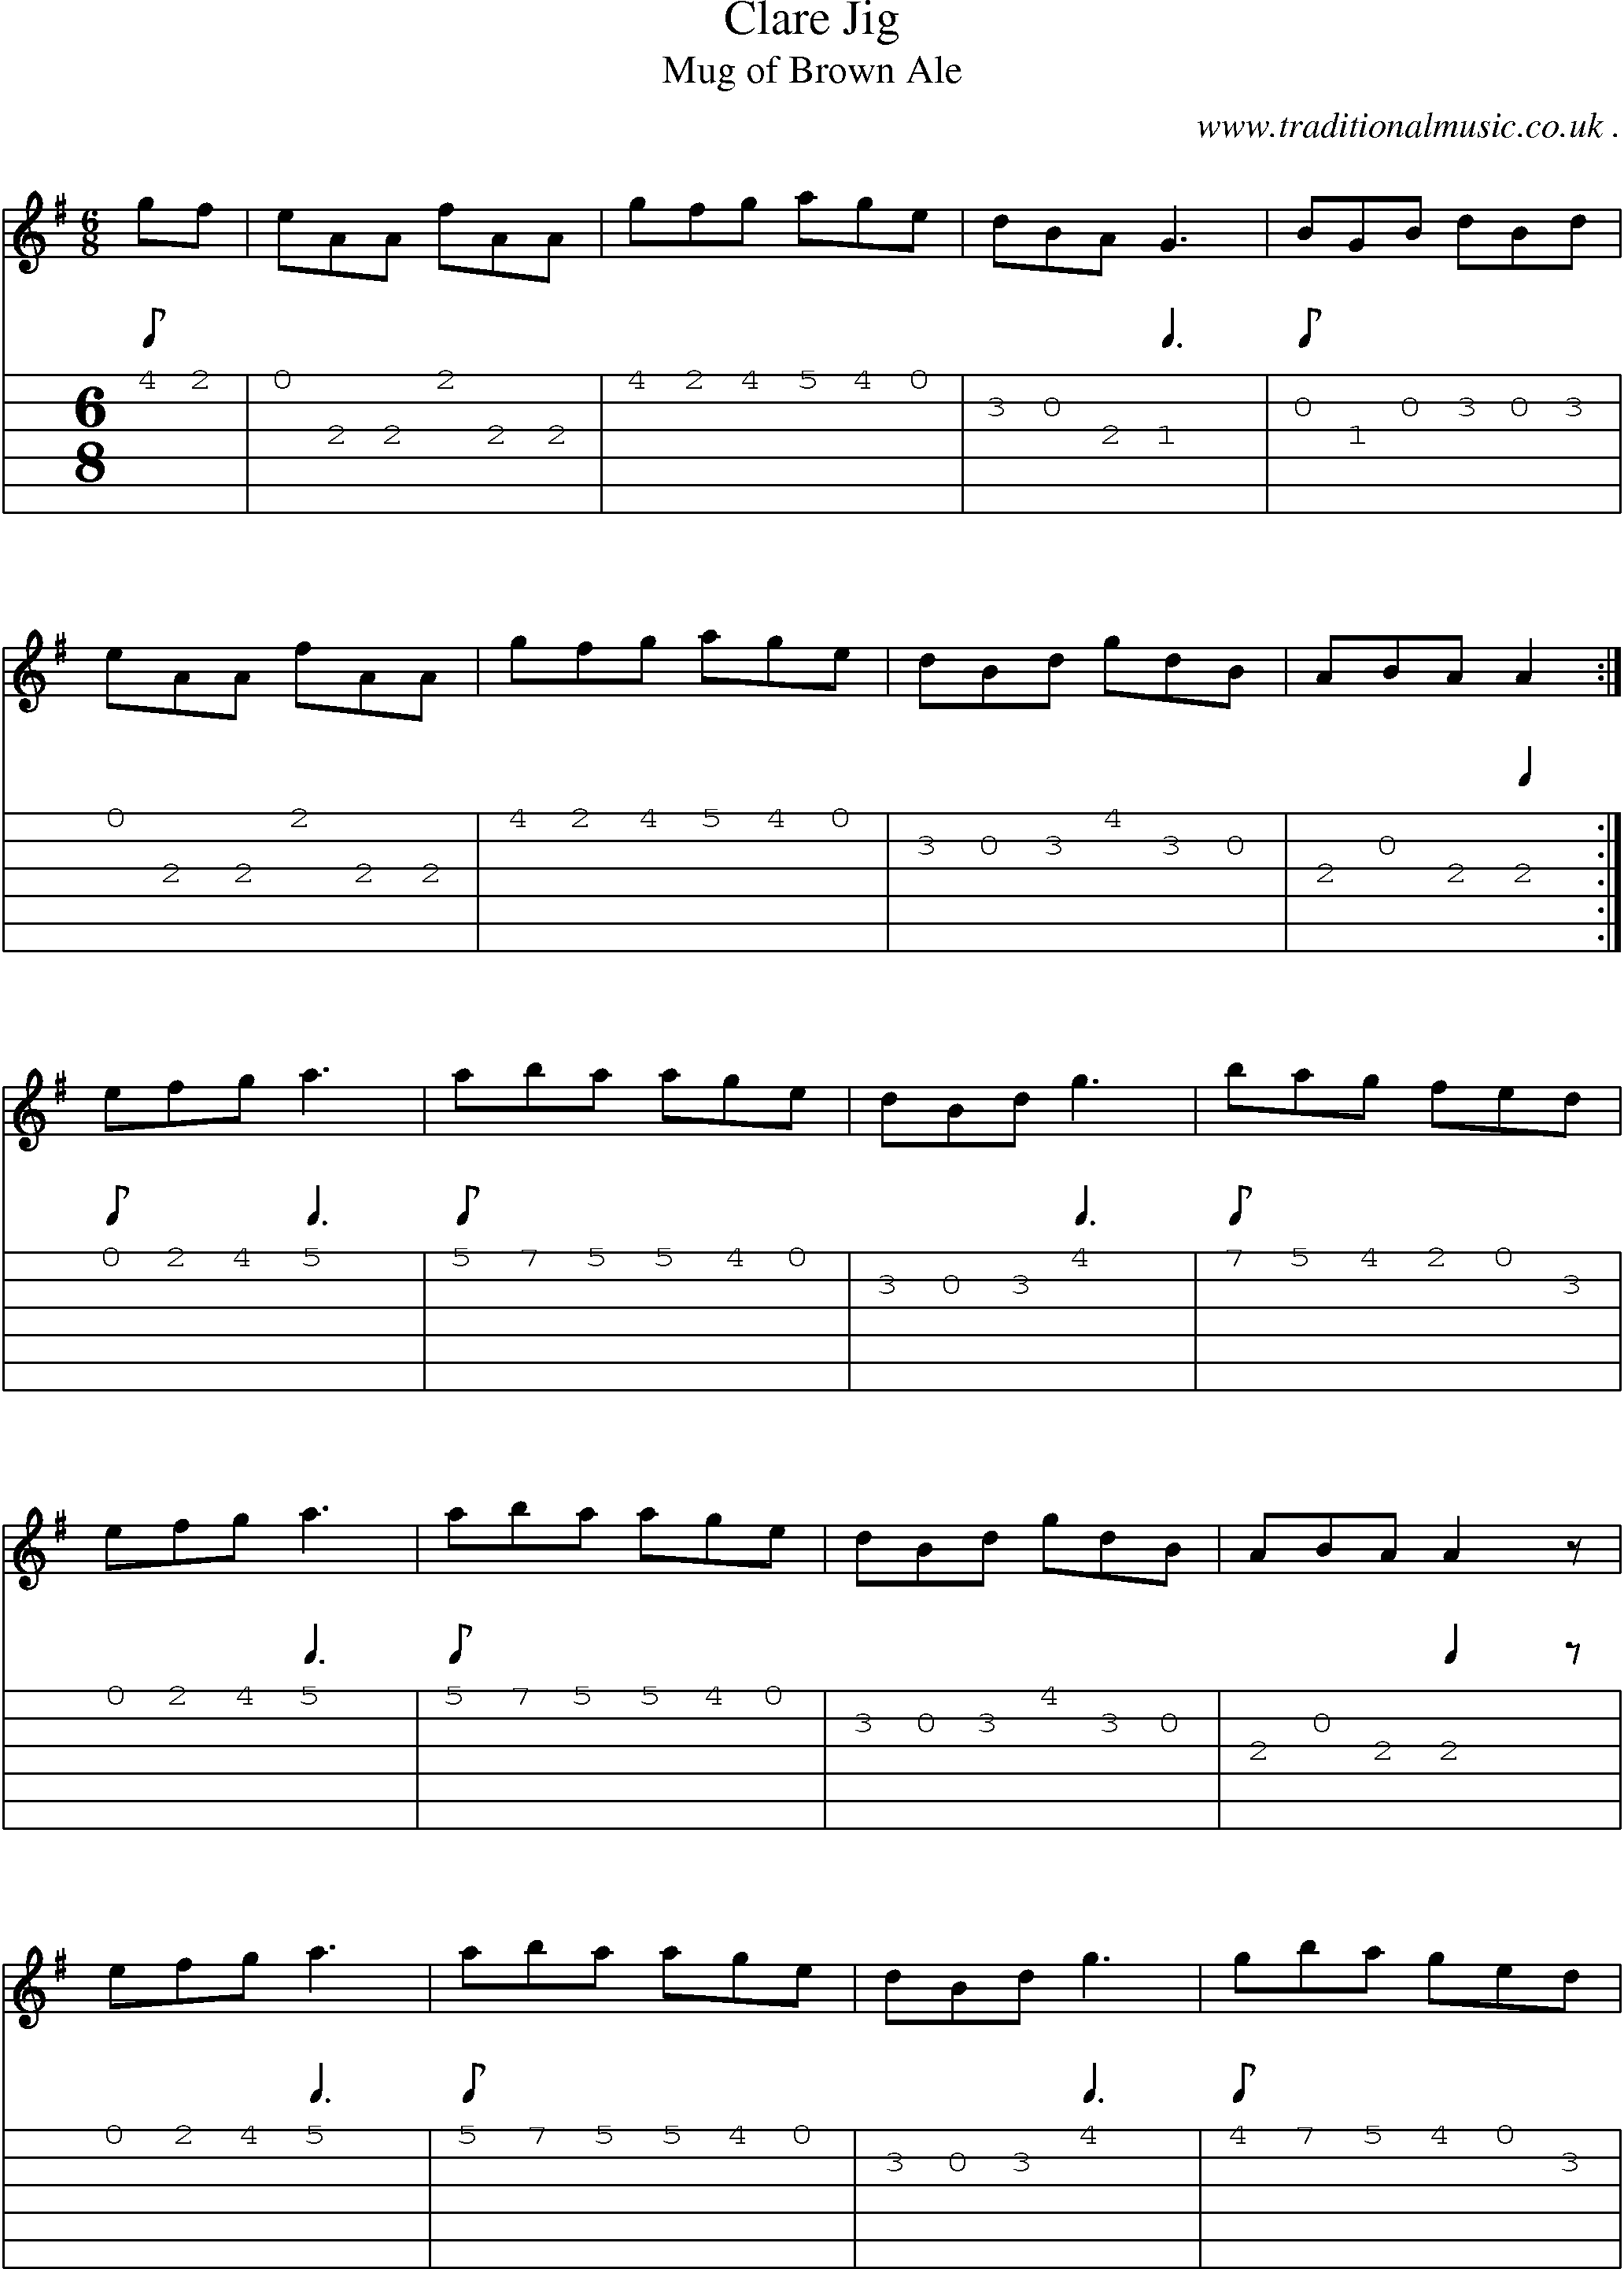 Sheet-Music and Guitar Tabs for Clare Jig